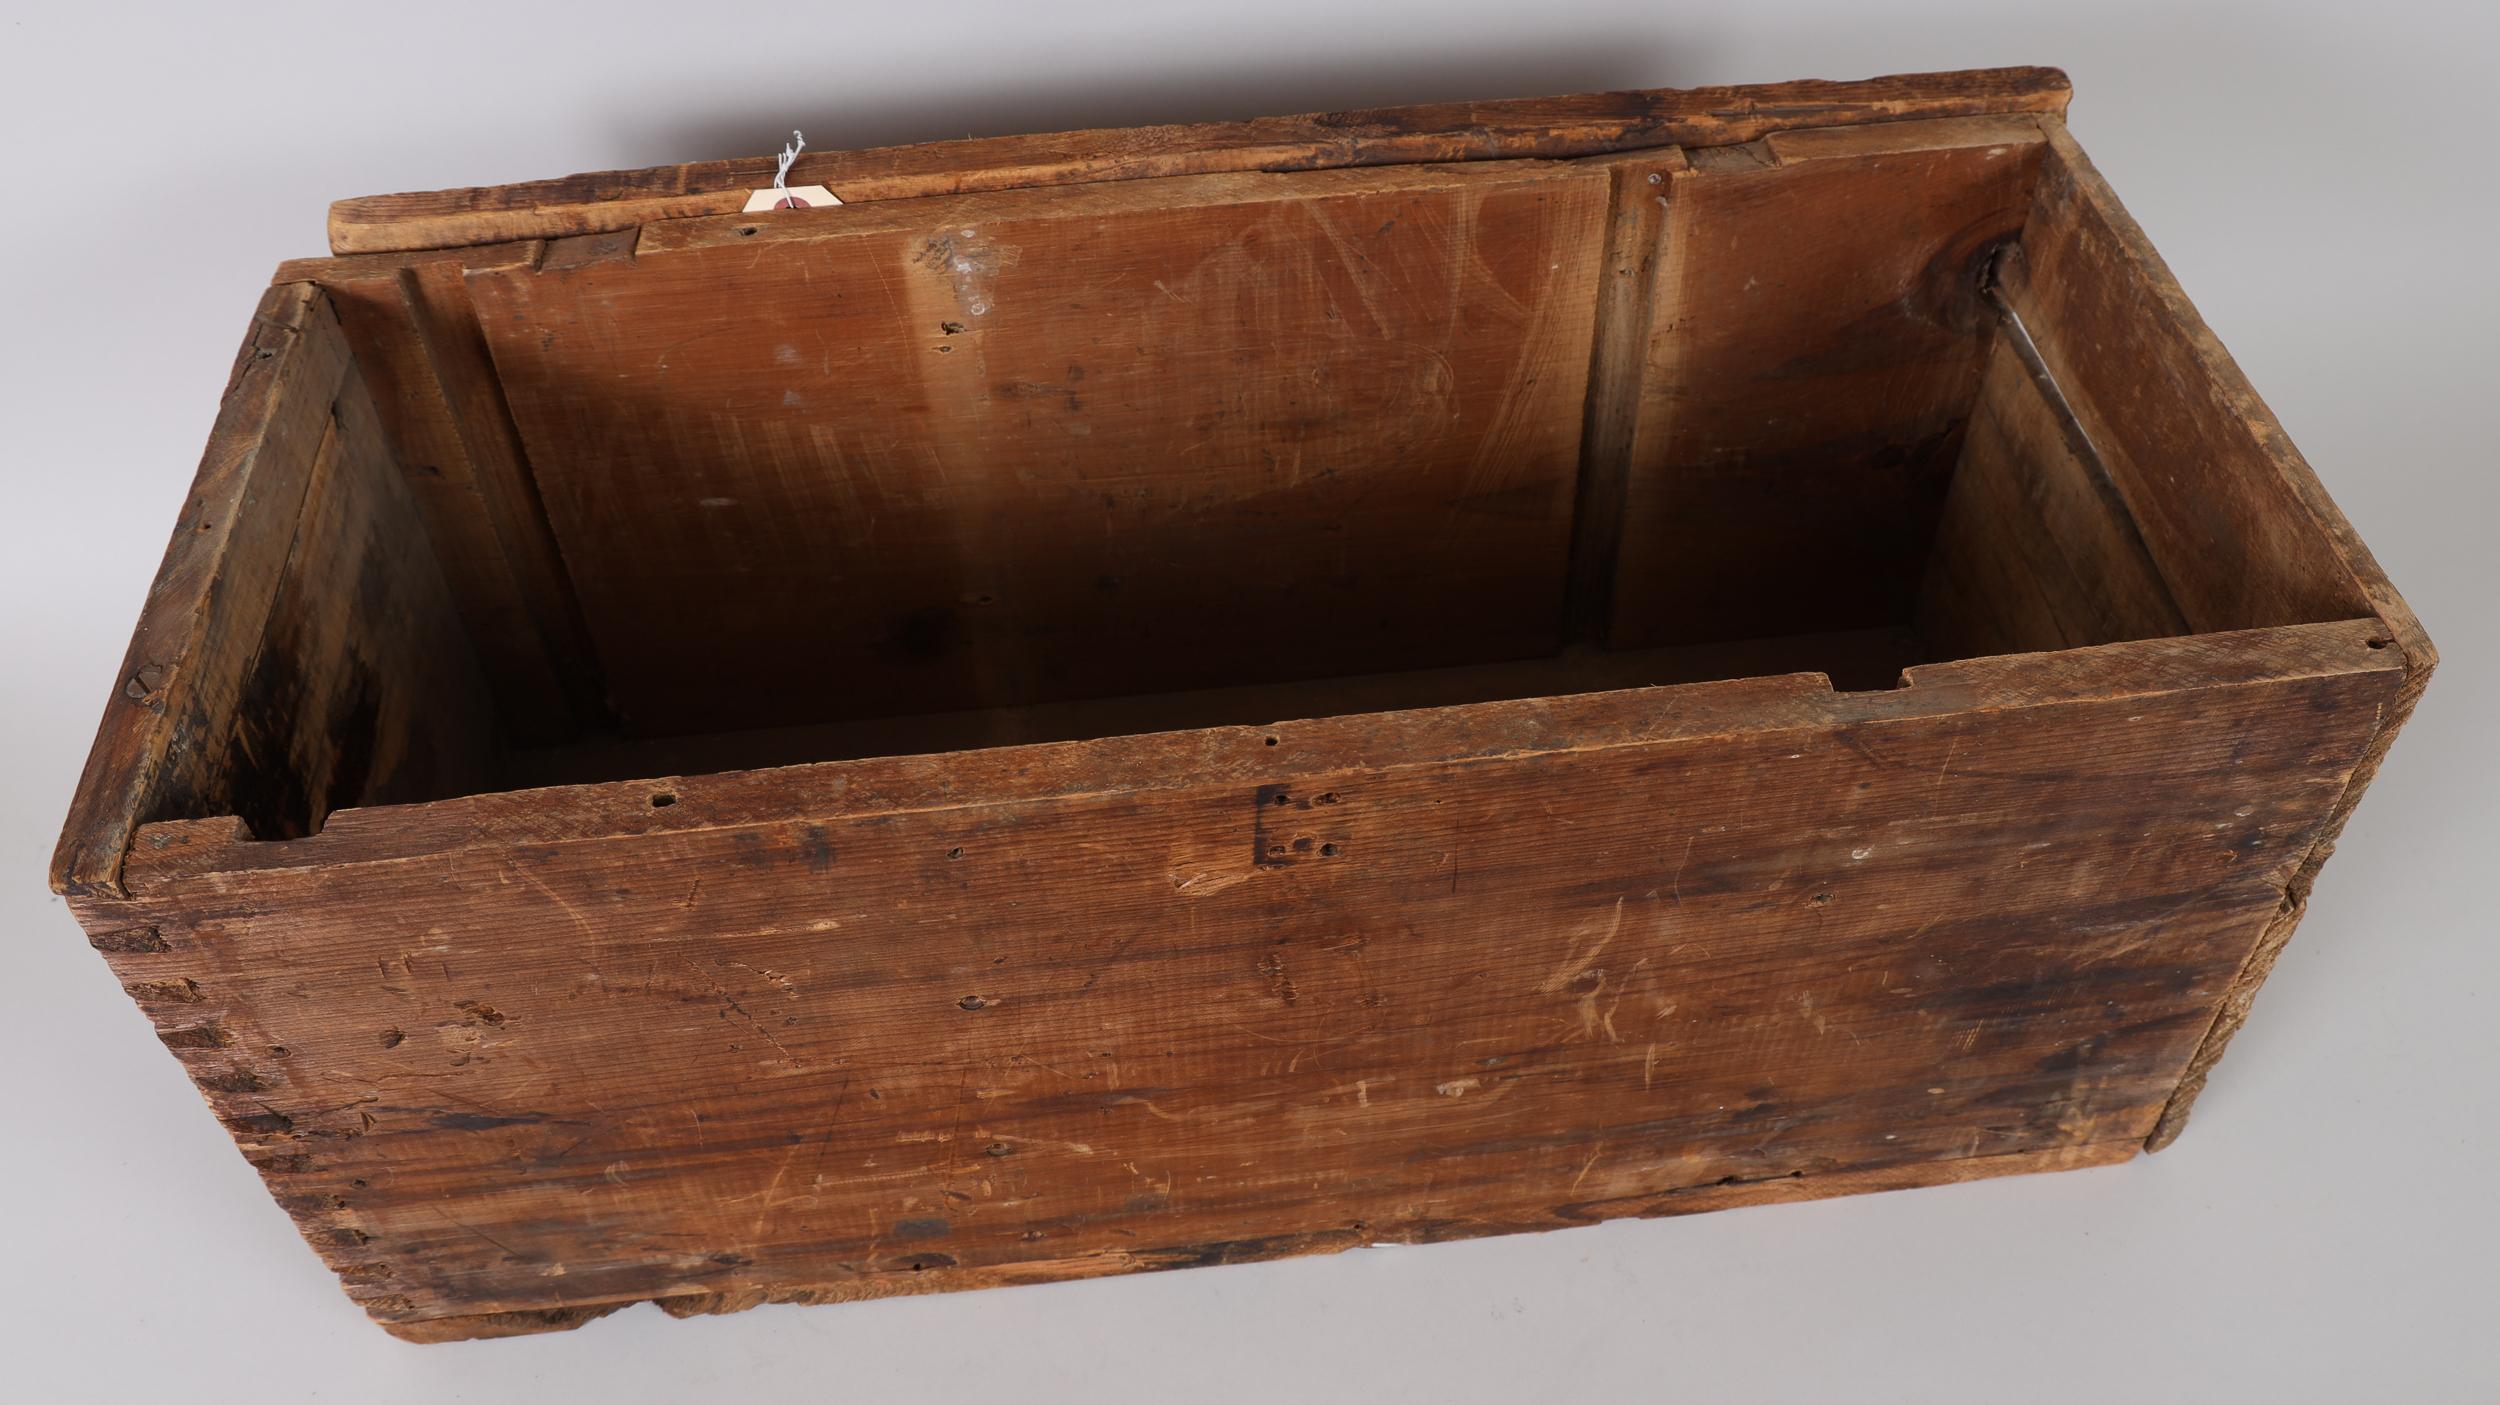 Winchester 1897 Wooden Crate